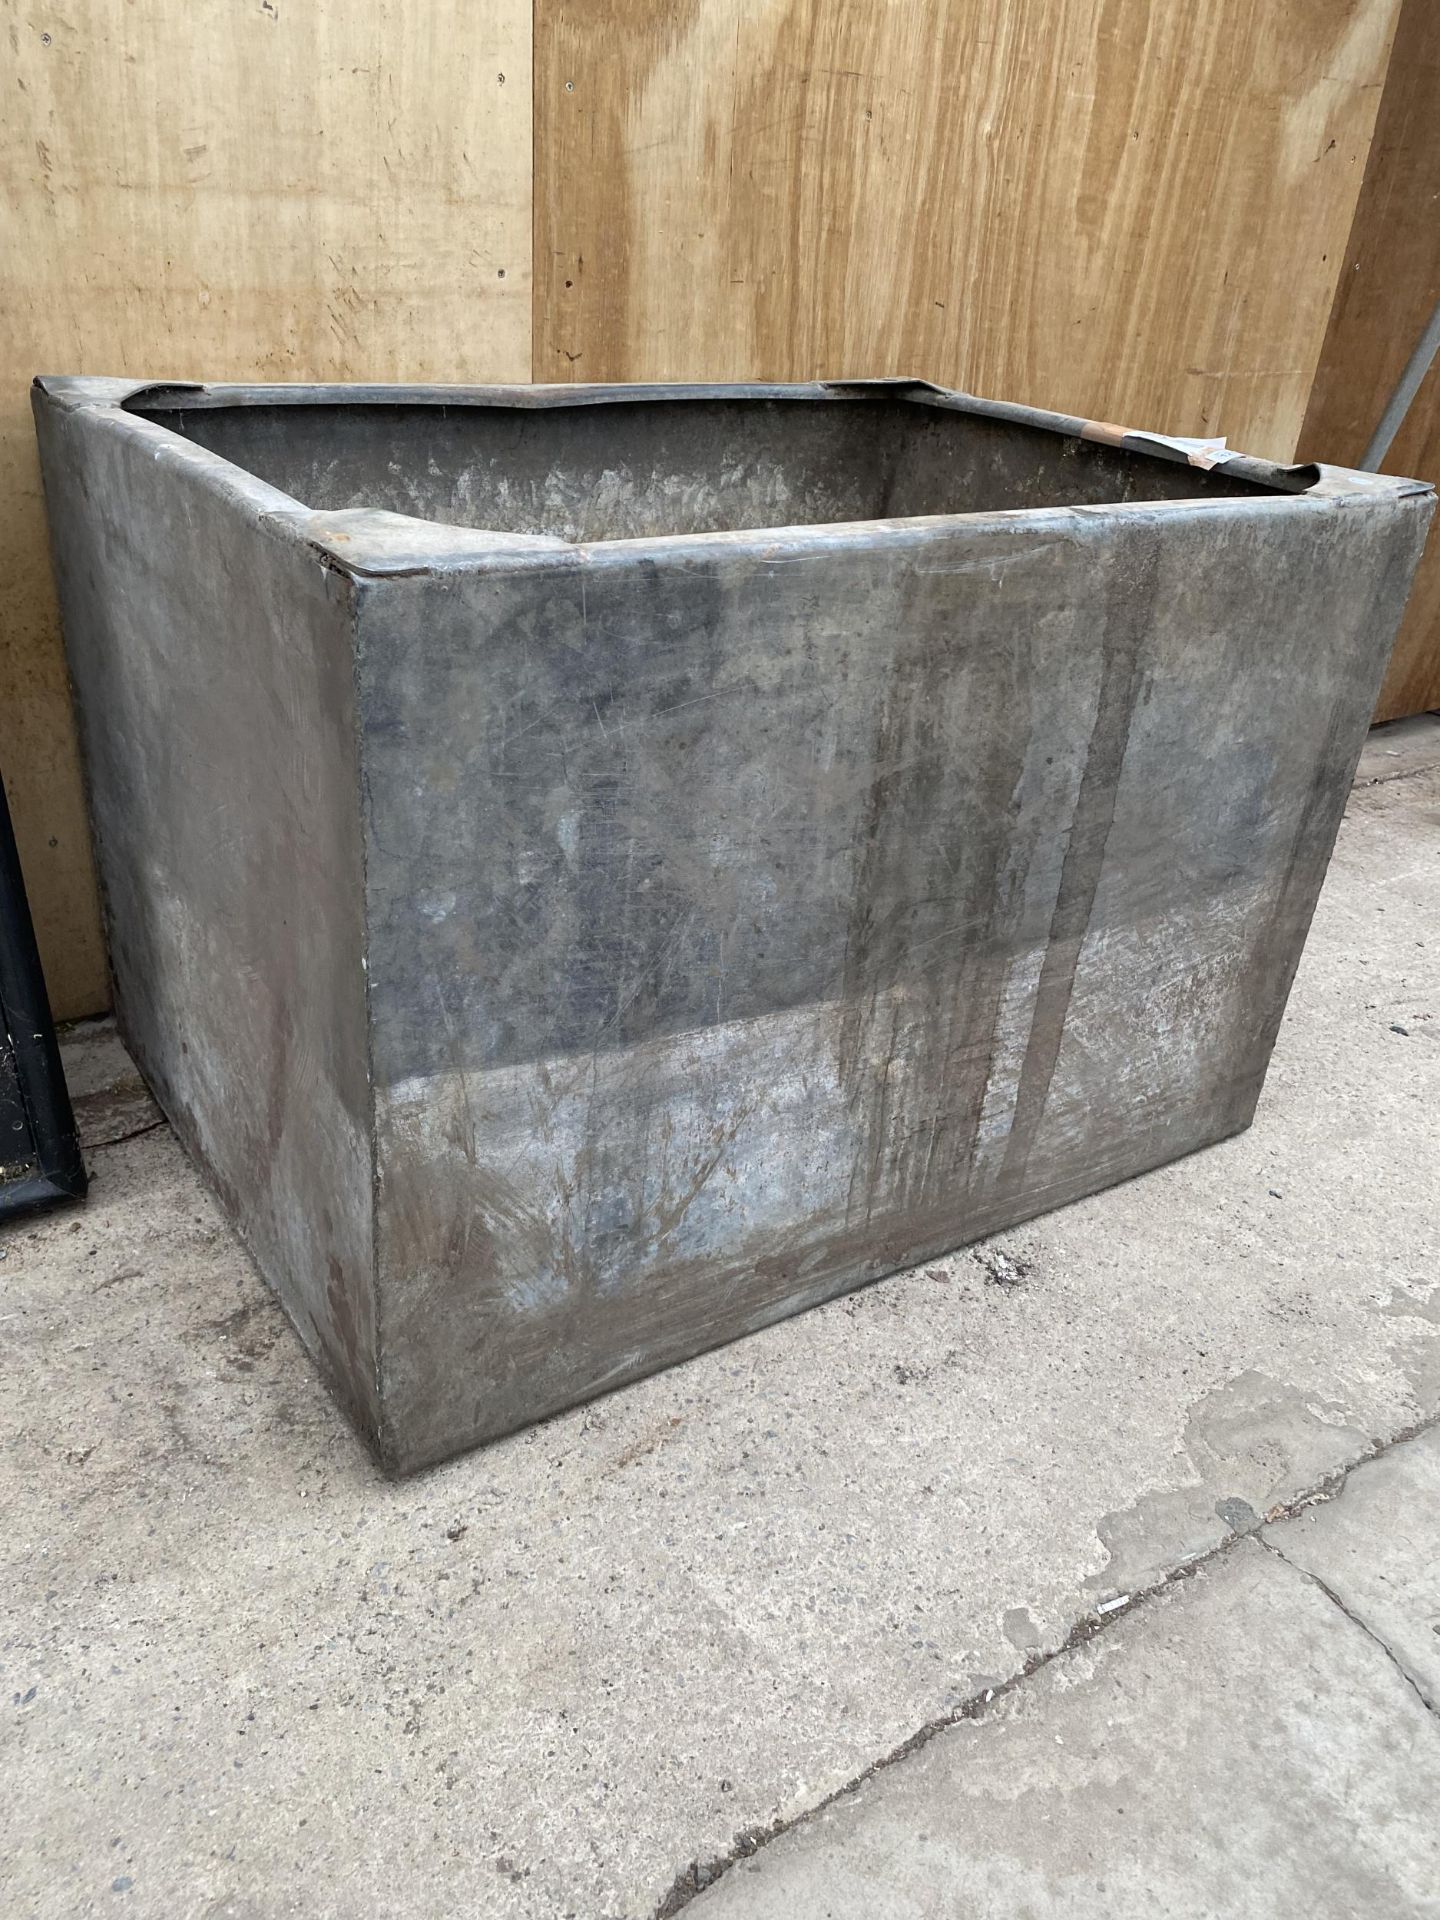 A VINTAGE GALVANISED WATER TANK/PLANTER (90CM X 66CM) - Image 2 of 3